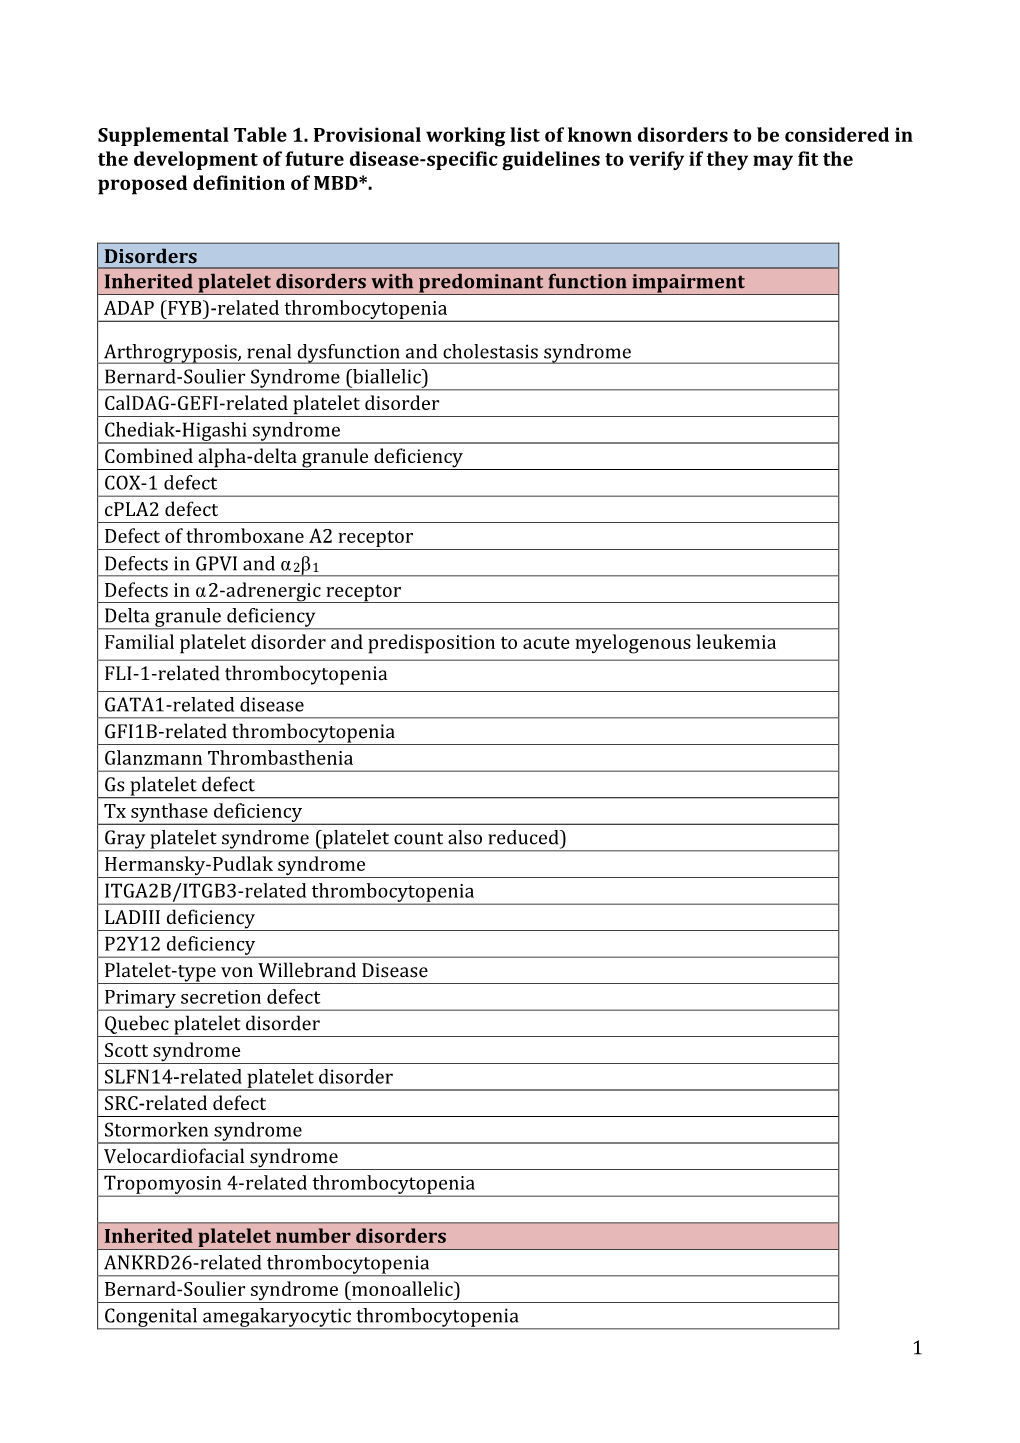 1 Supplemental Table 1. Provisional Working List of Known Disorders to Be Considered in the Development of Future Disease-Specif